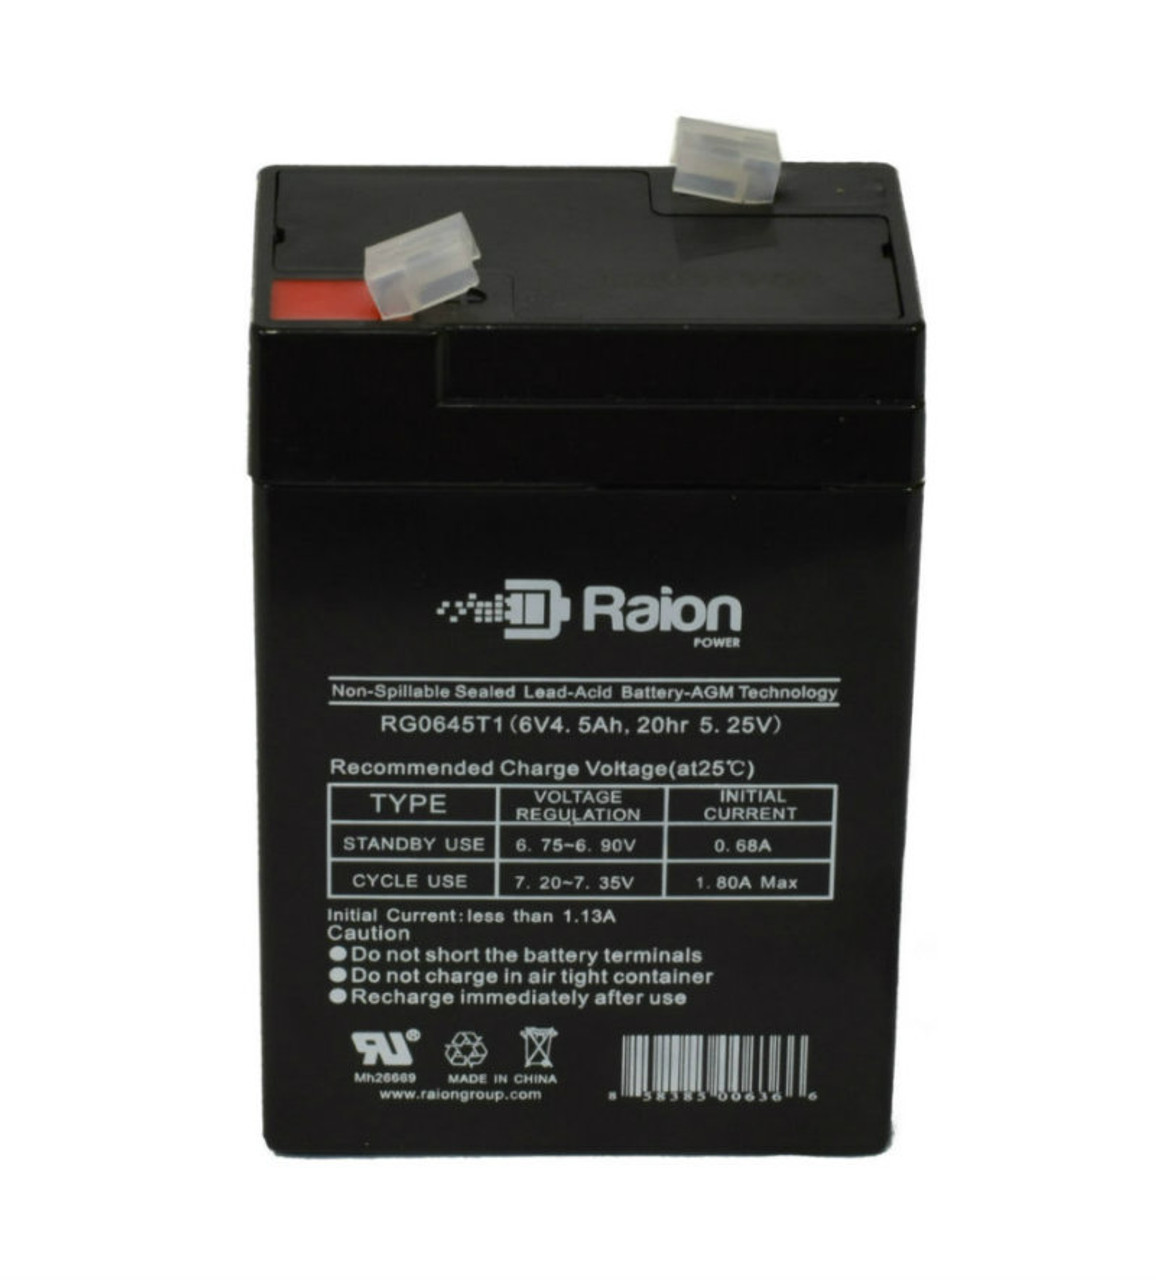 Raion Power RG0645T1 Replacement Battery Cartridge for Criticare Systems End/TLC02 Pulse Oximeter